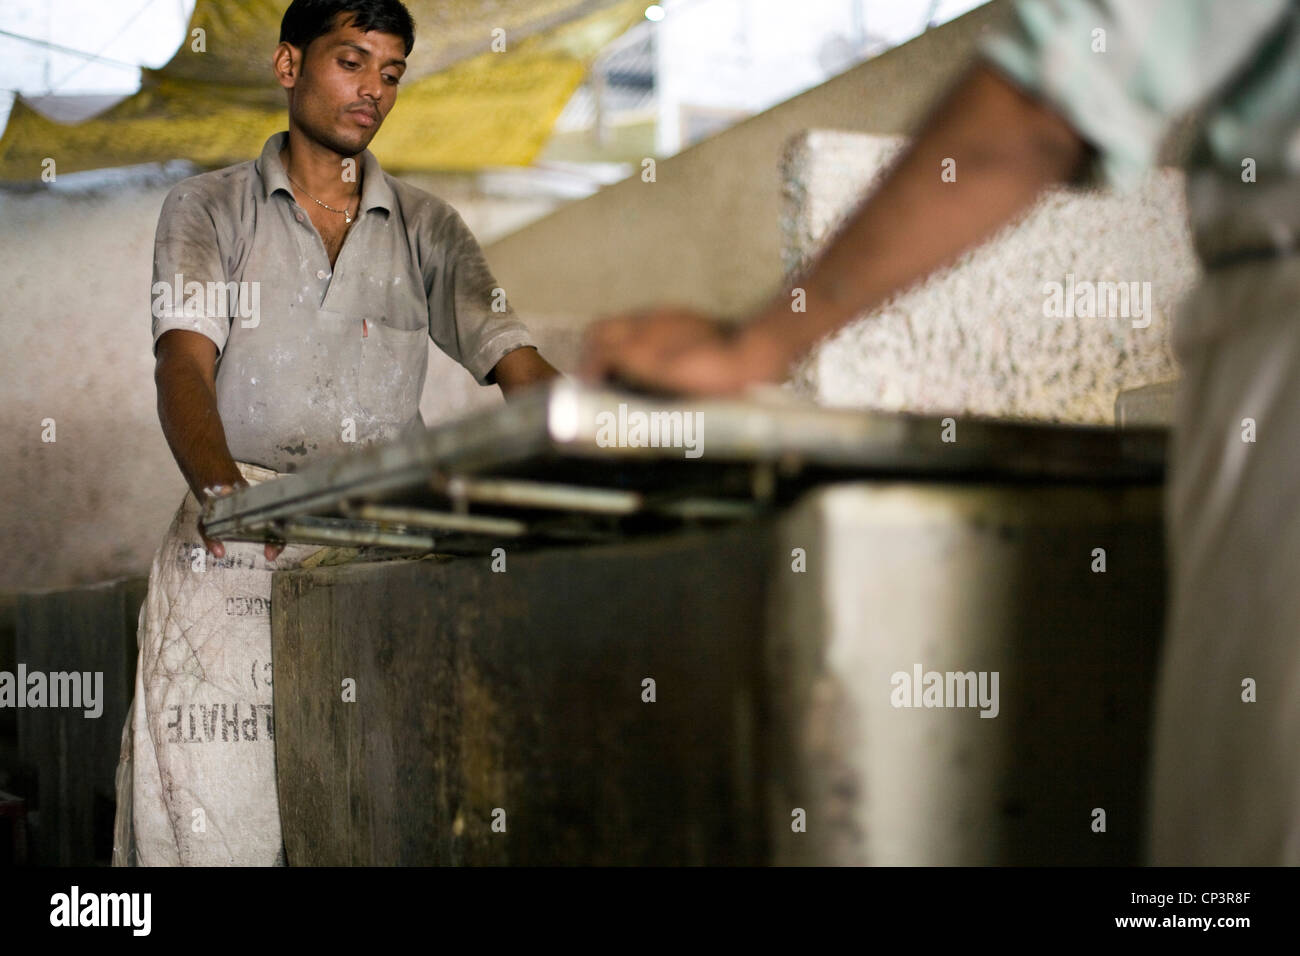 Workers making paper by hand at a factory in Sanganer, Jaipur, India Stock Photo